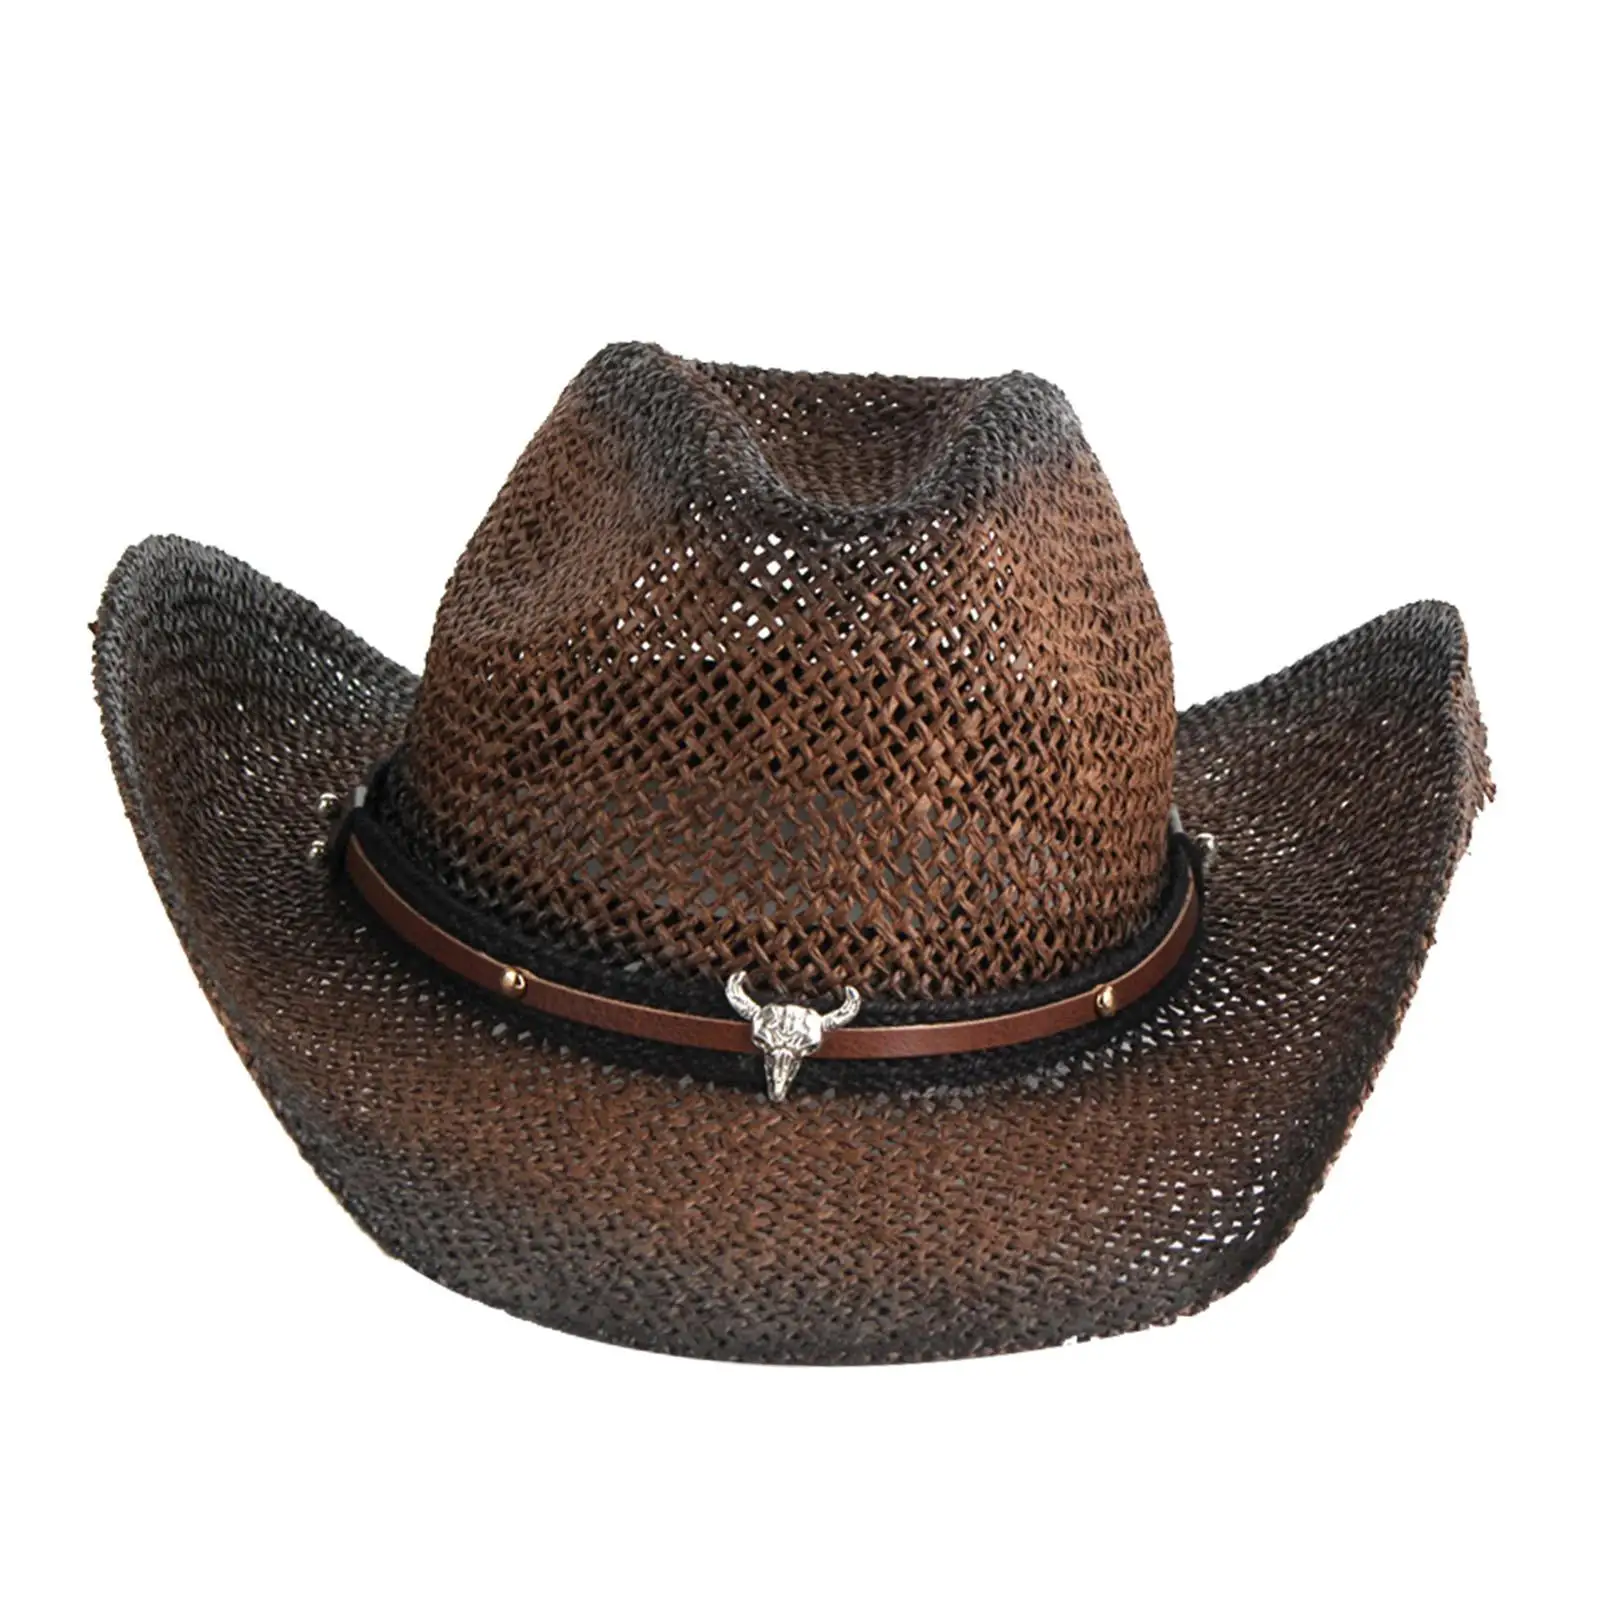 Western Straw Cowboy hat Couple hat Sunscreen Hat Cowboy Hats for Beach Horseback Riding Rodeo Festival Outdoor